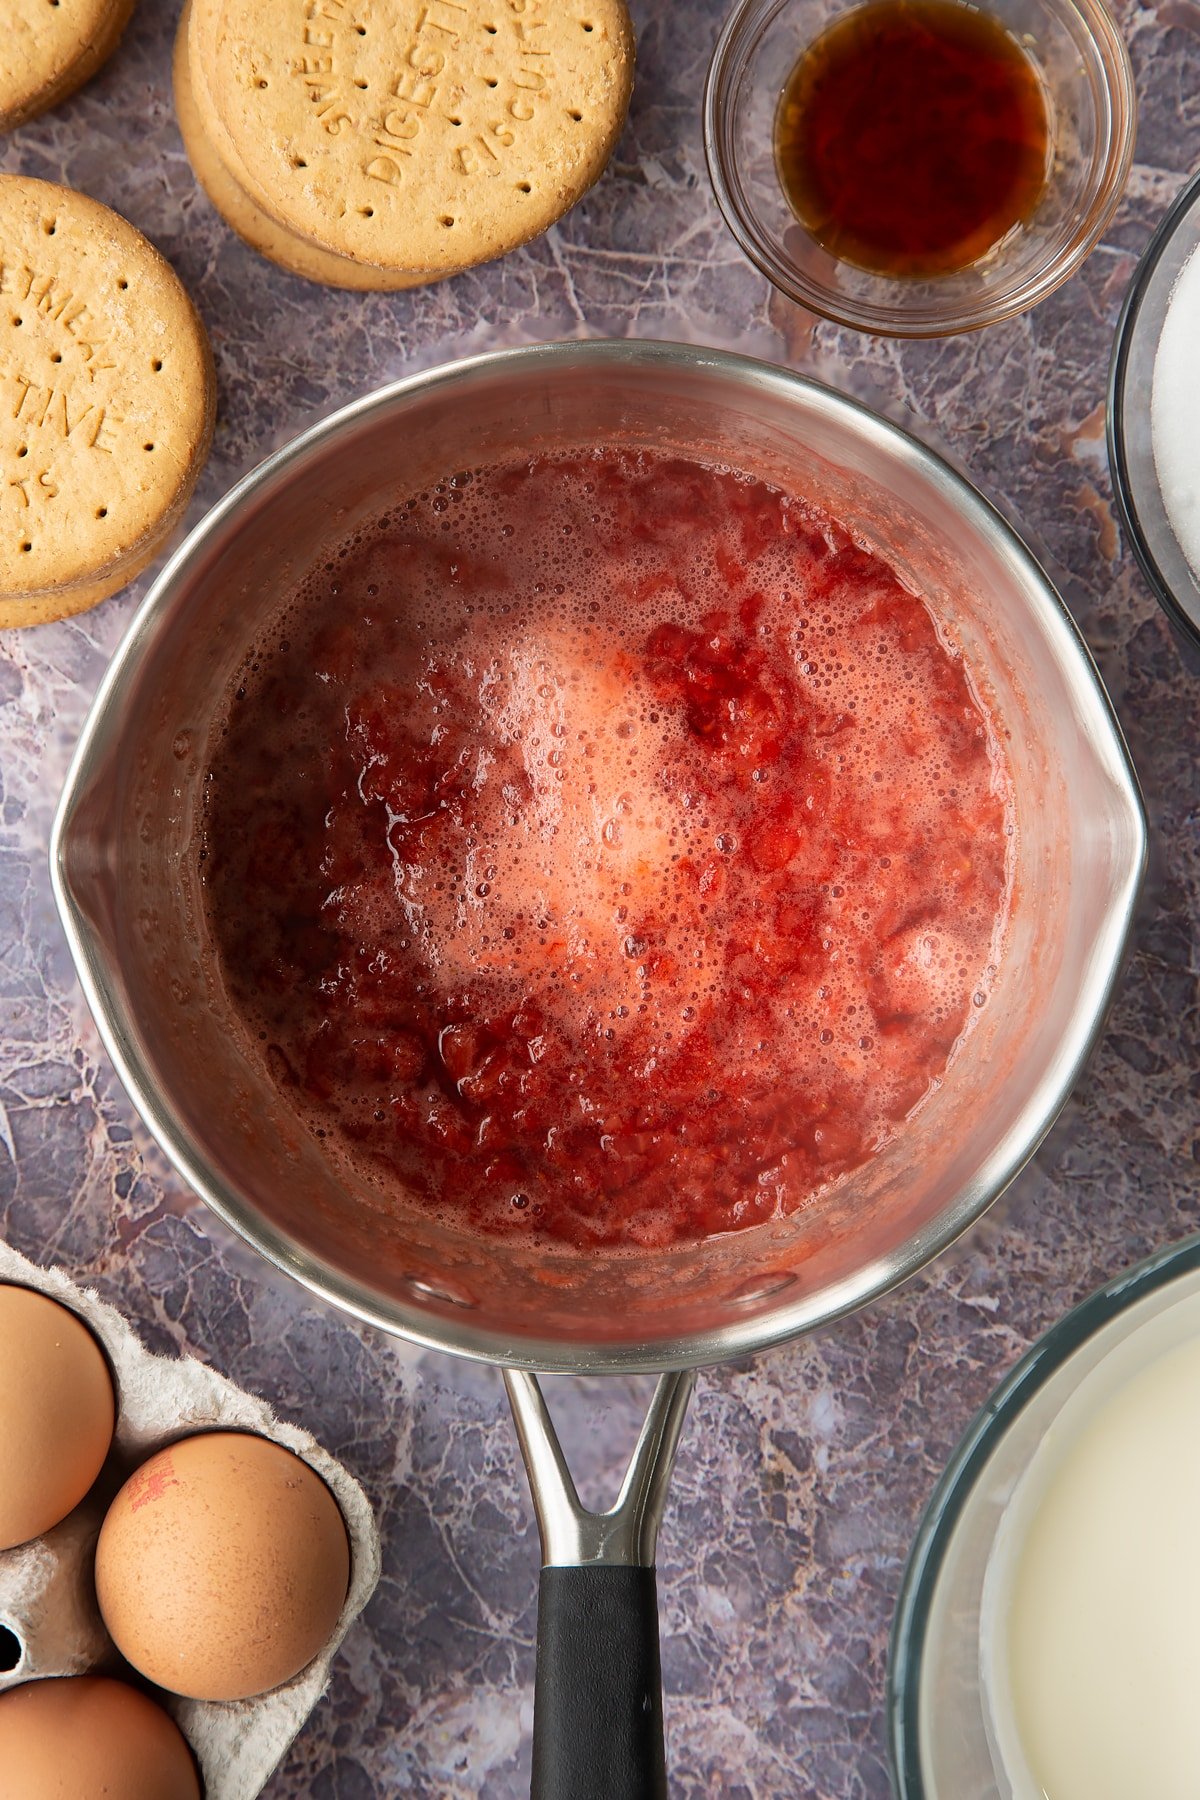 broken down strawberries in a pan with the sugar and lemon juice.